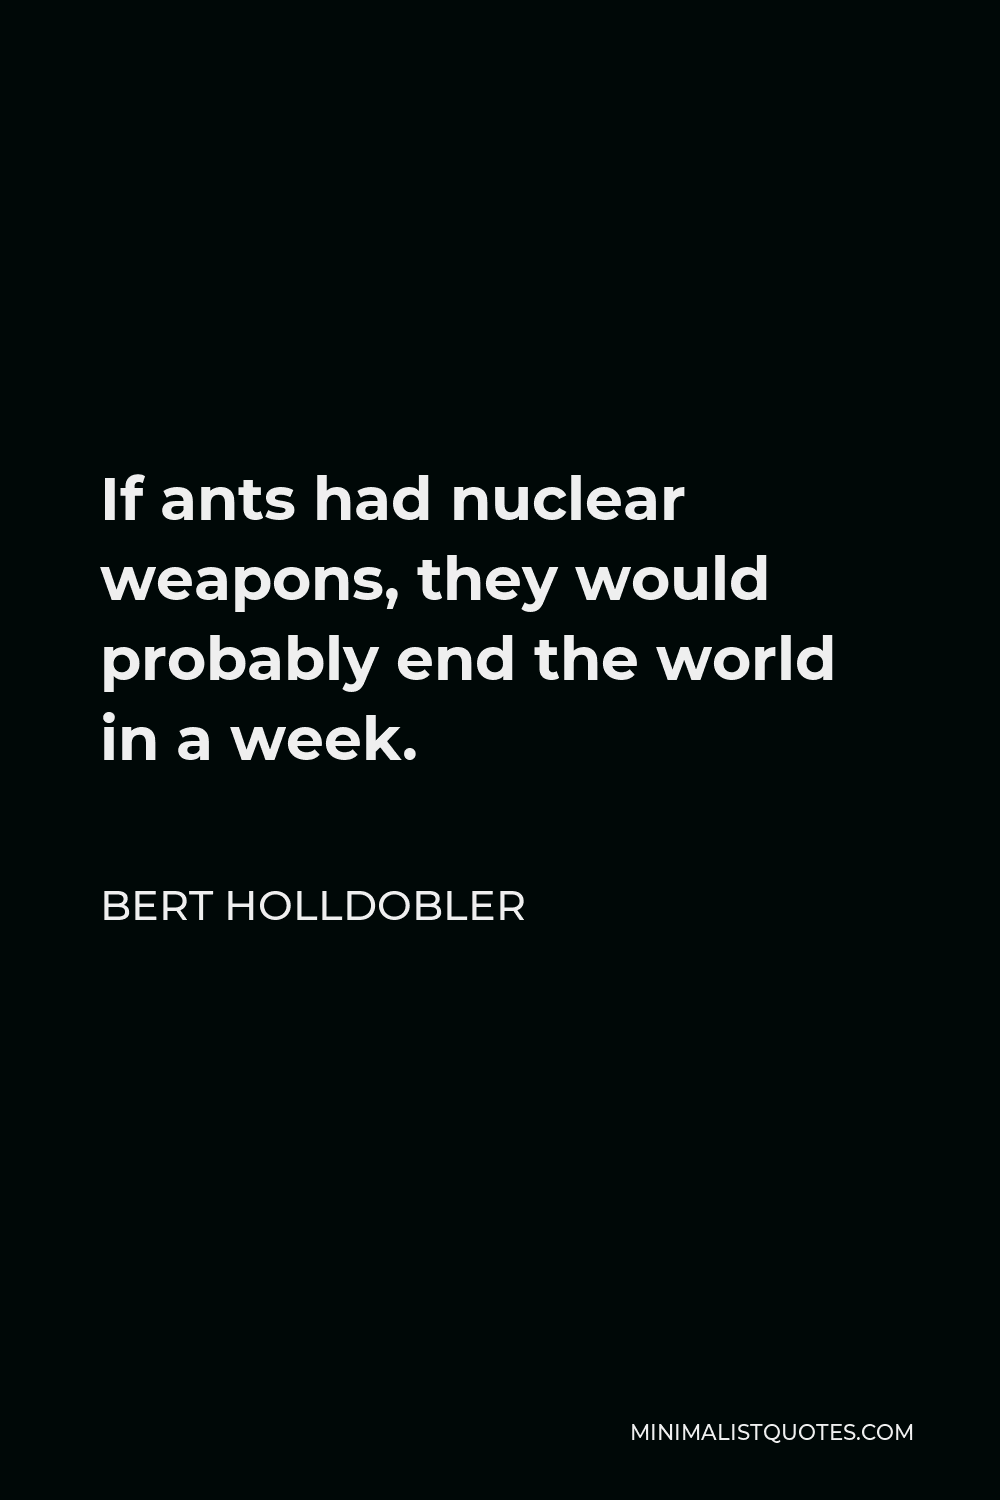 Bert Holldobler Quote - If ants had nuclear weapons, they would probably end the world in a week.